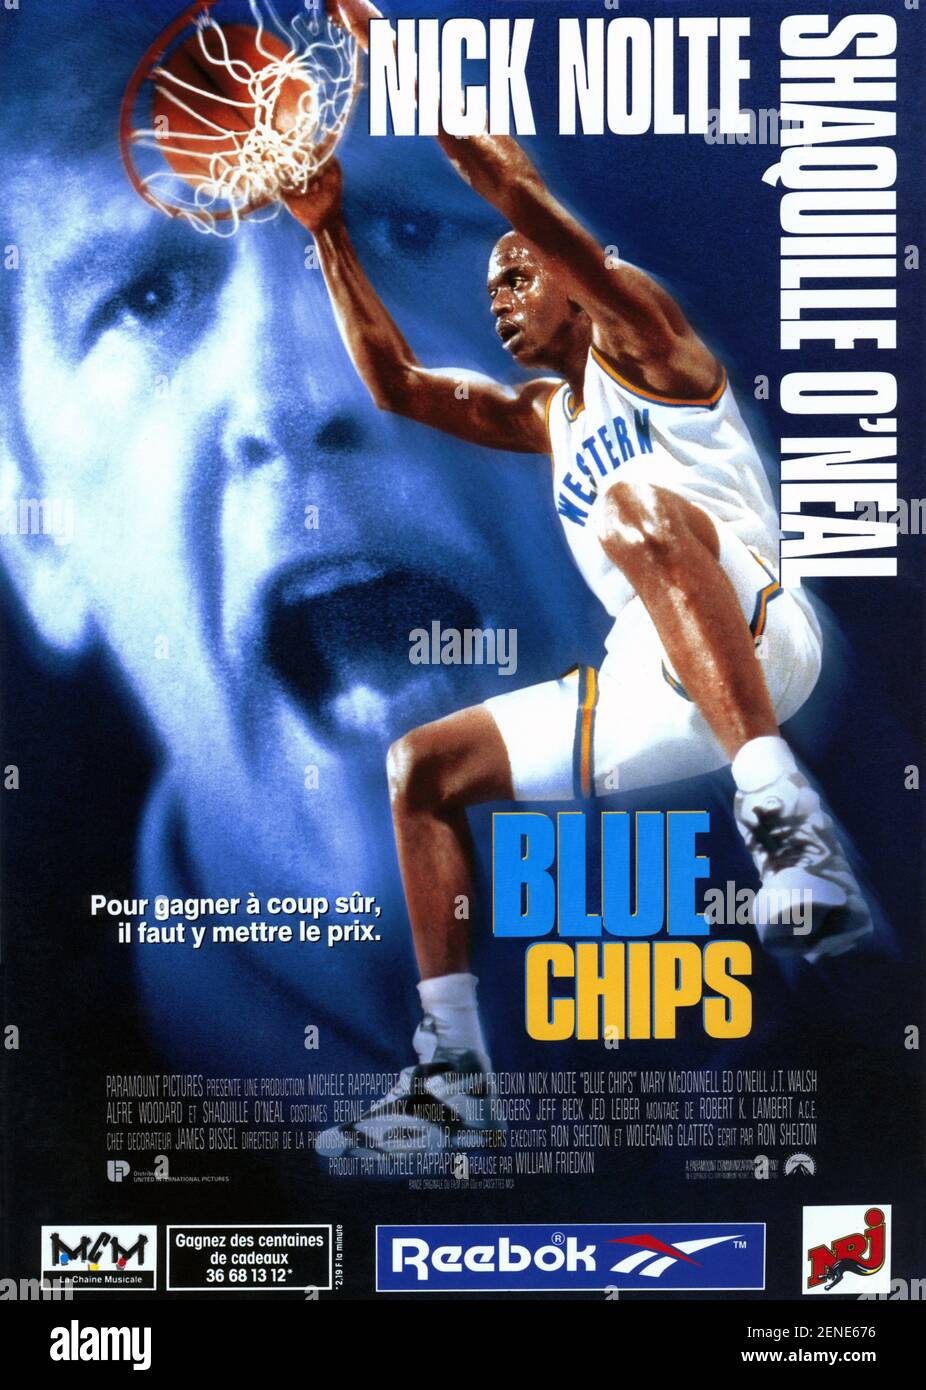 94 Blue Chips Nick Nolte Shaquille O'Neal x4 Book Cover Promo Shaq